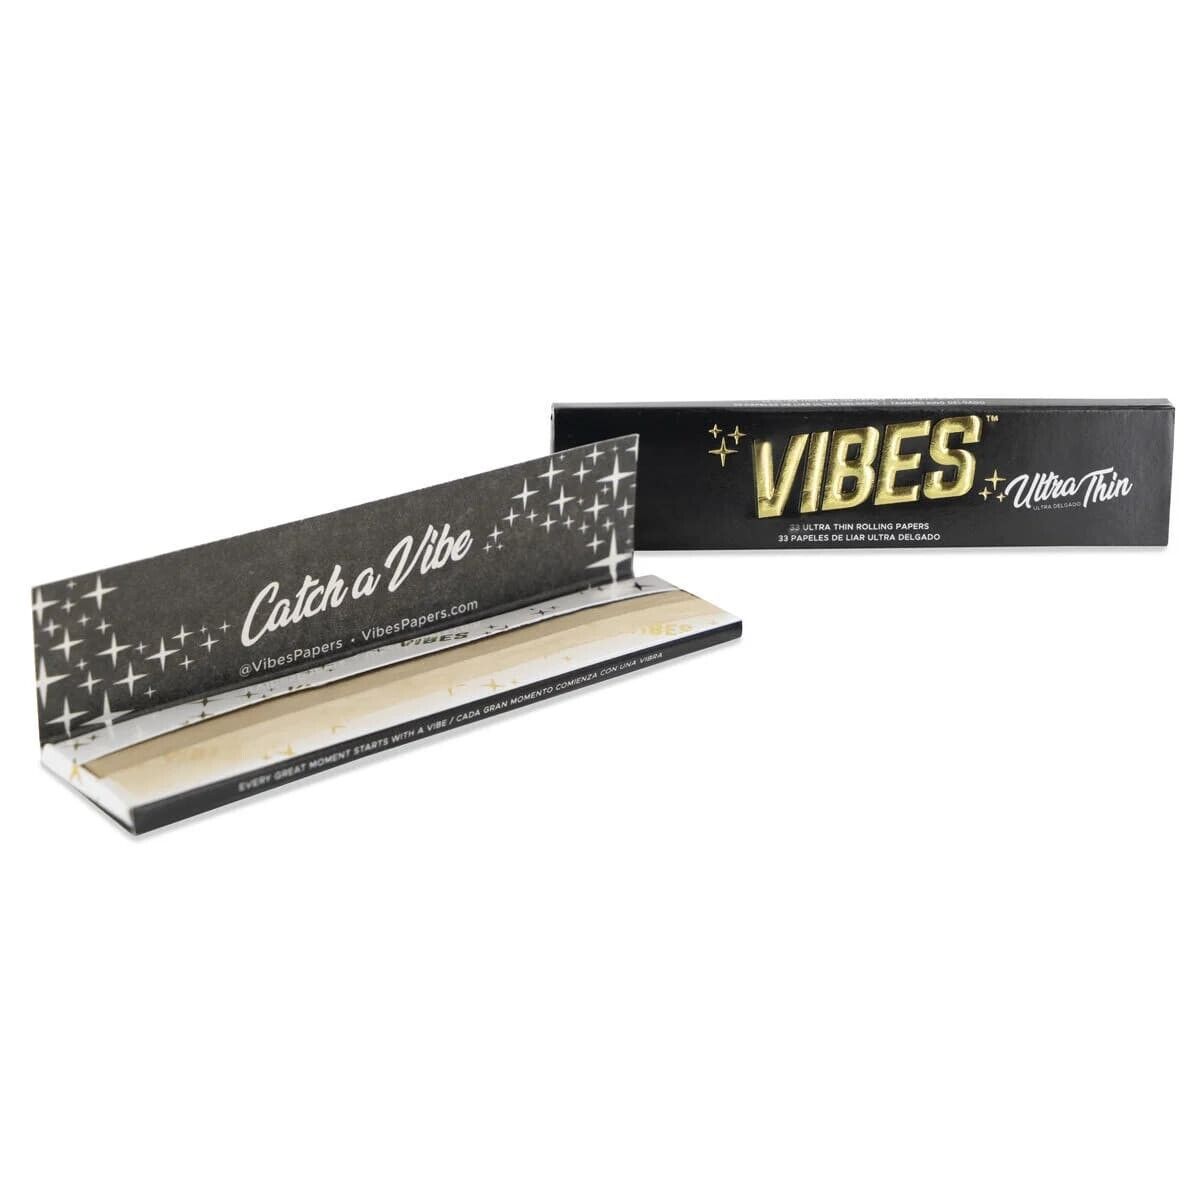 5 X VIBES Ultra Thin Rolling Papers